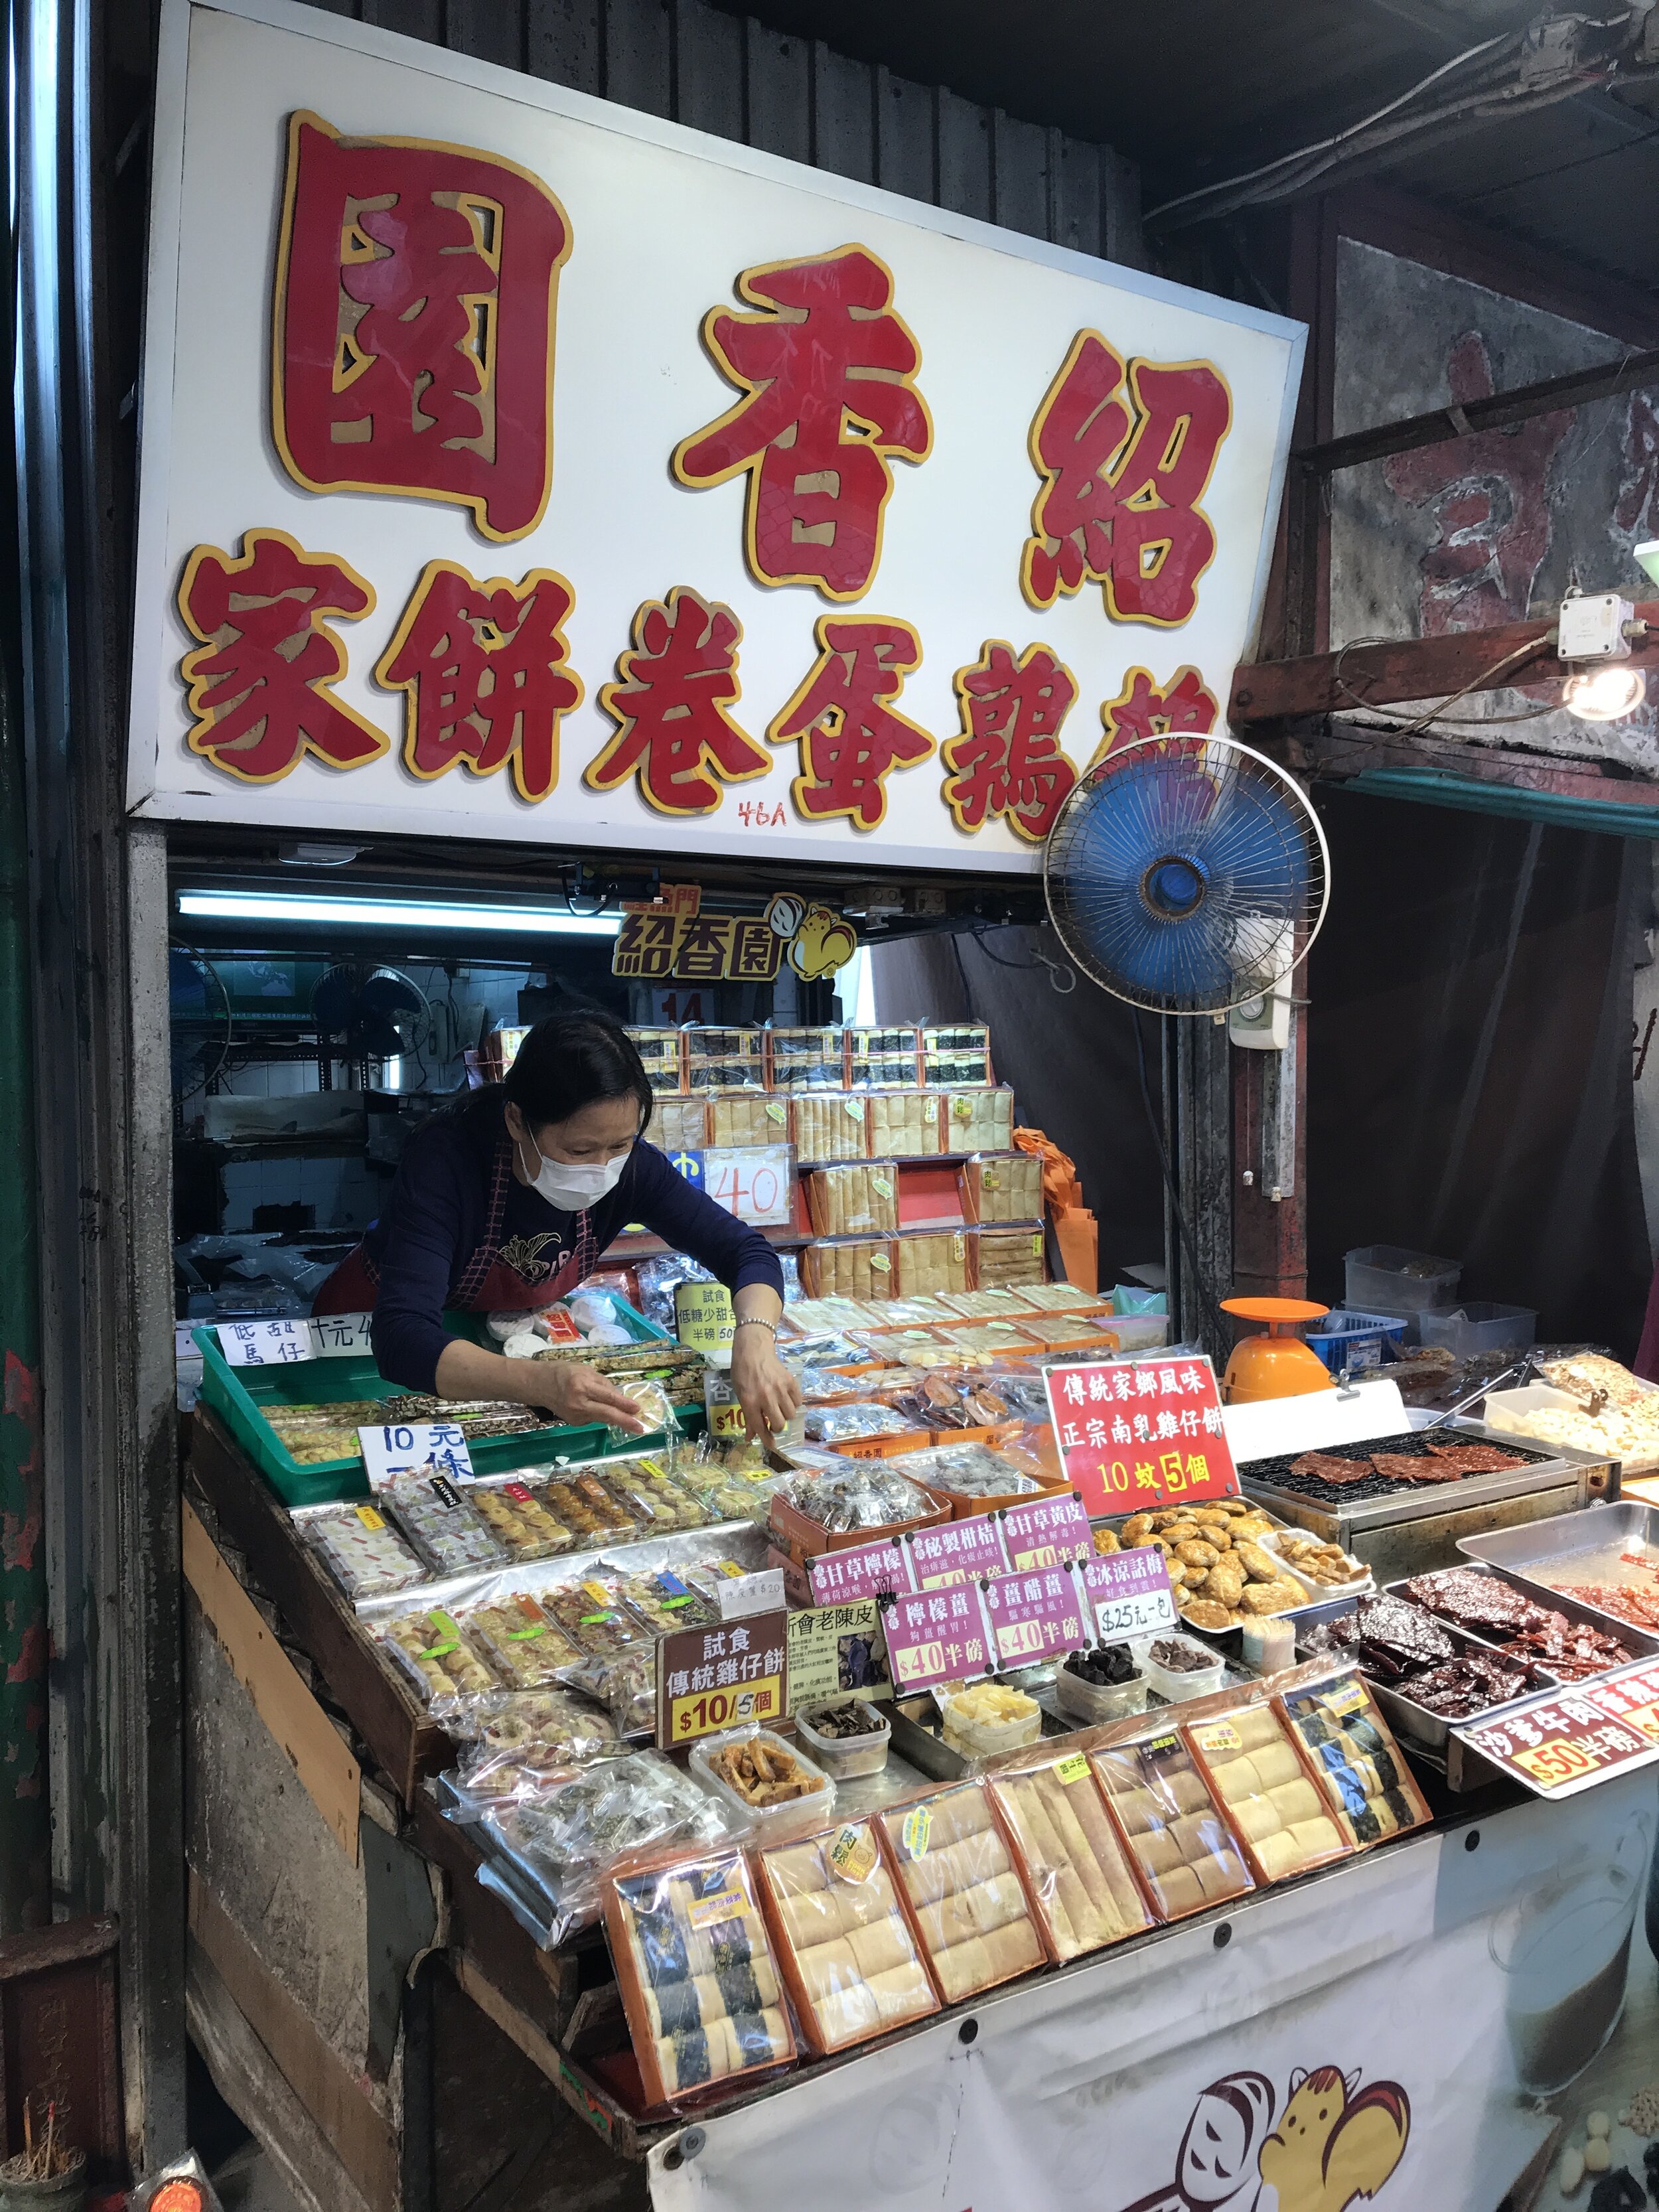 Shop front for traditional snacks